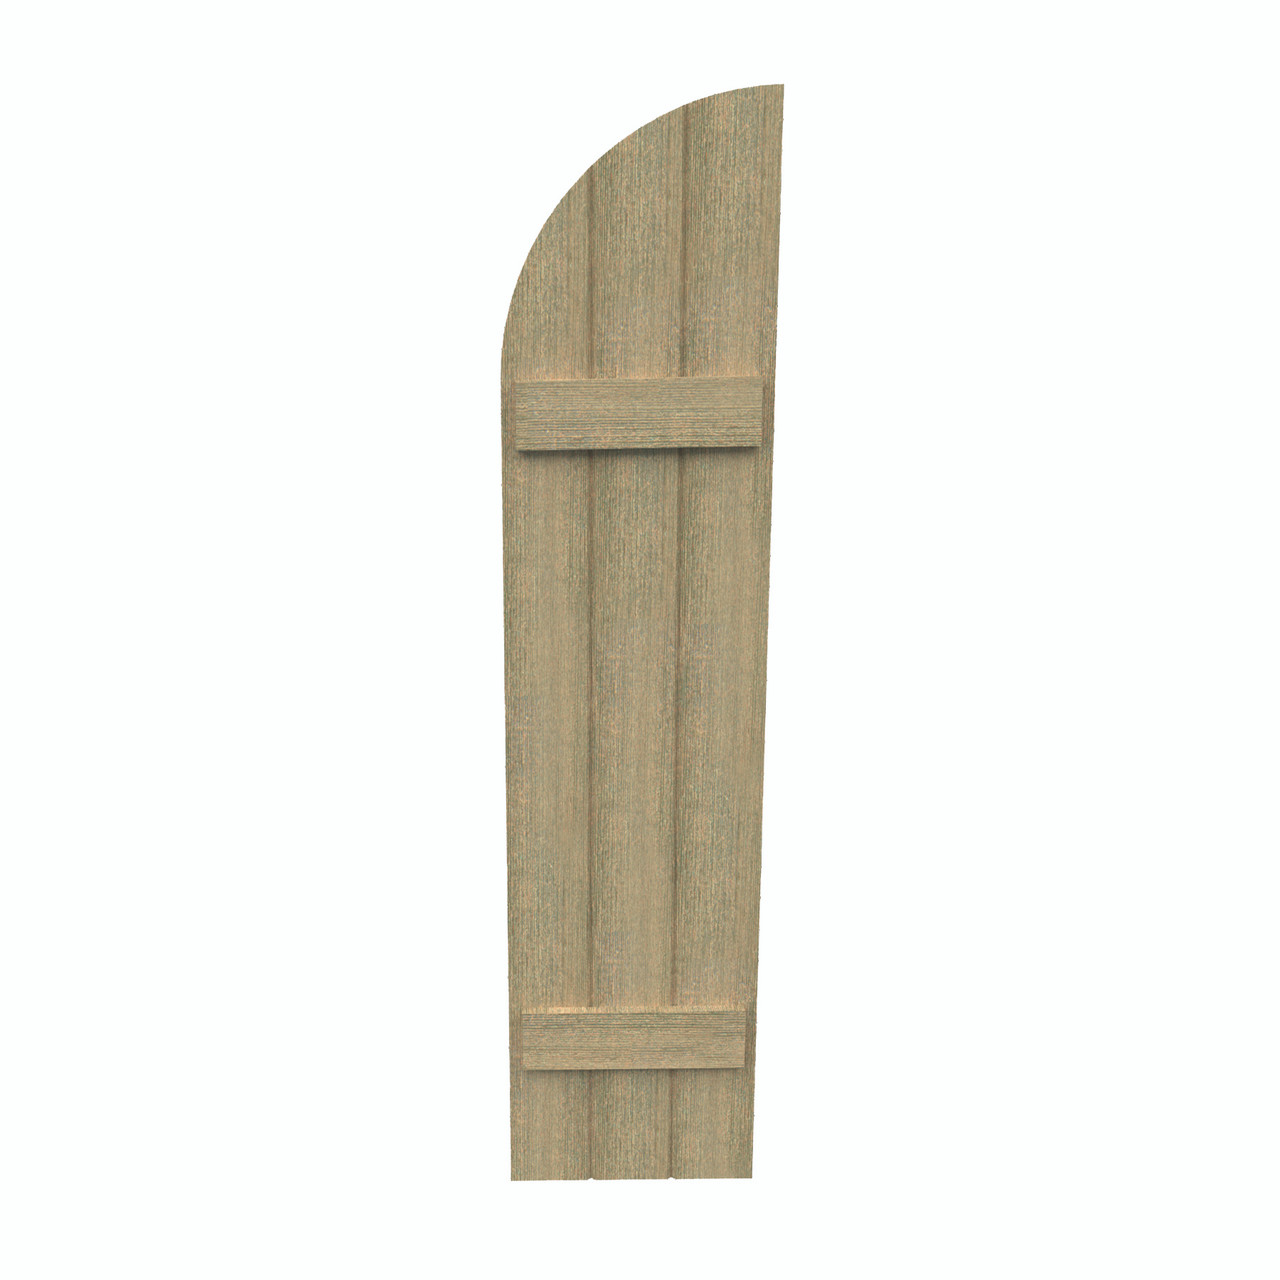 18 inch by 47 inch Quarter Round Shutter with 3-Boards